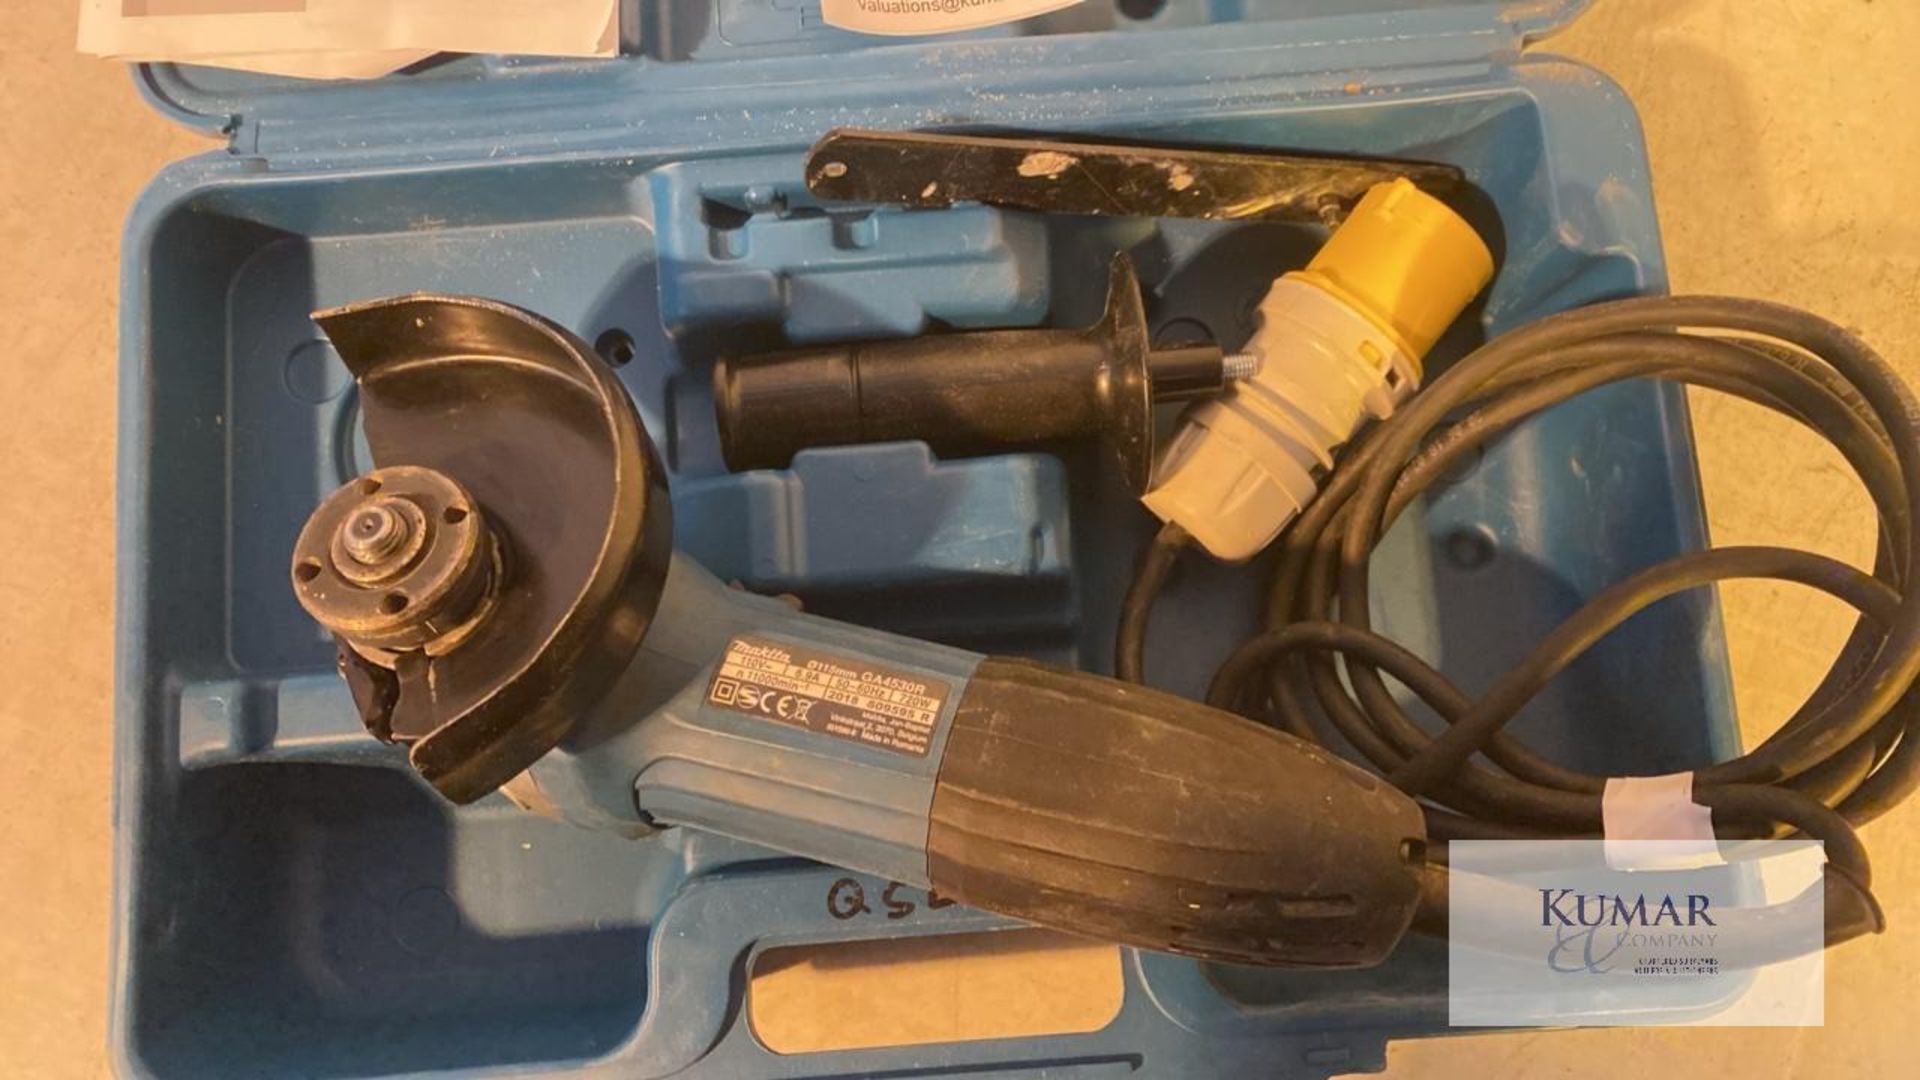 Makita GA4530R 110 Volt Angle Grinder with Carry Case - Image 4 of 5